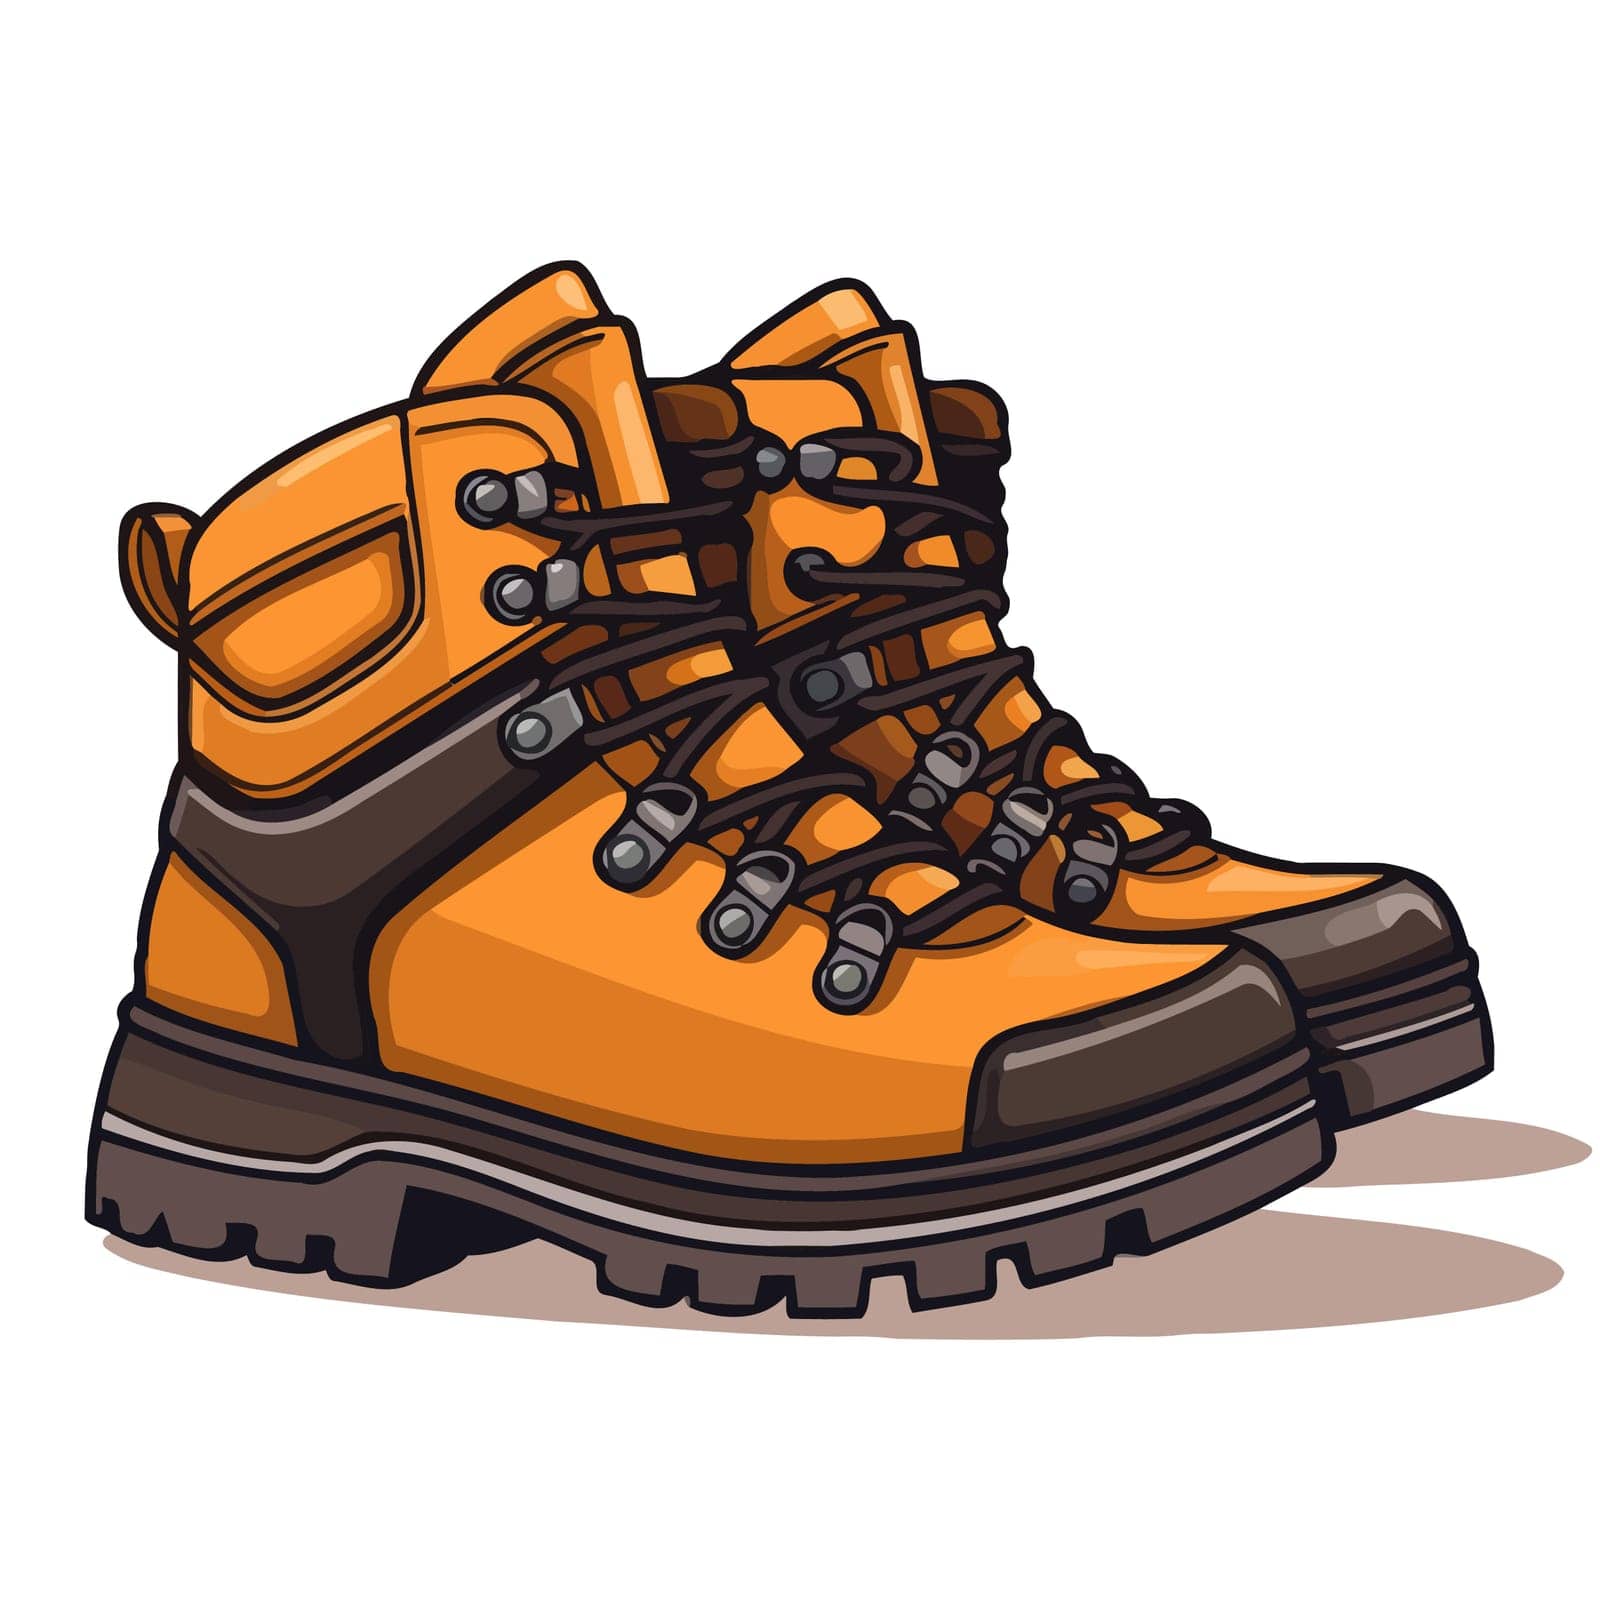 Boots image. Hiking boots image isolated. Vector illustration. Generated AI